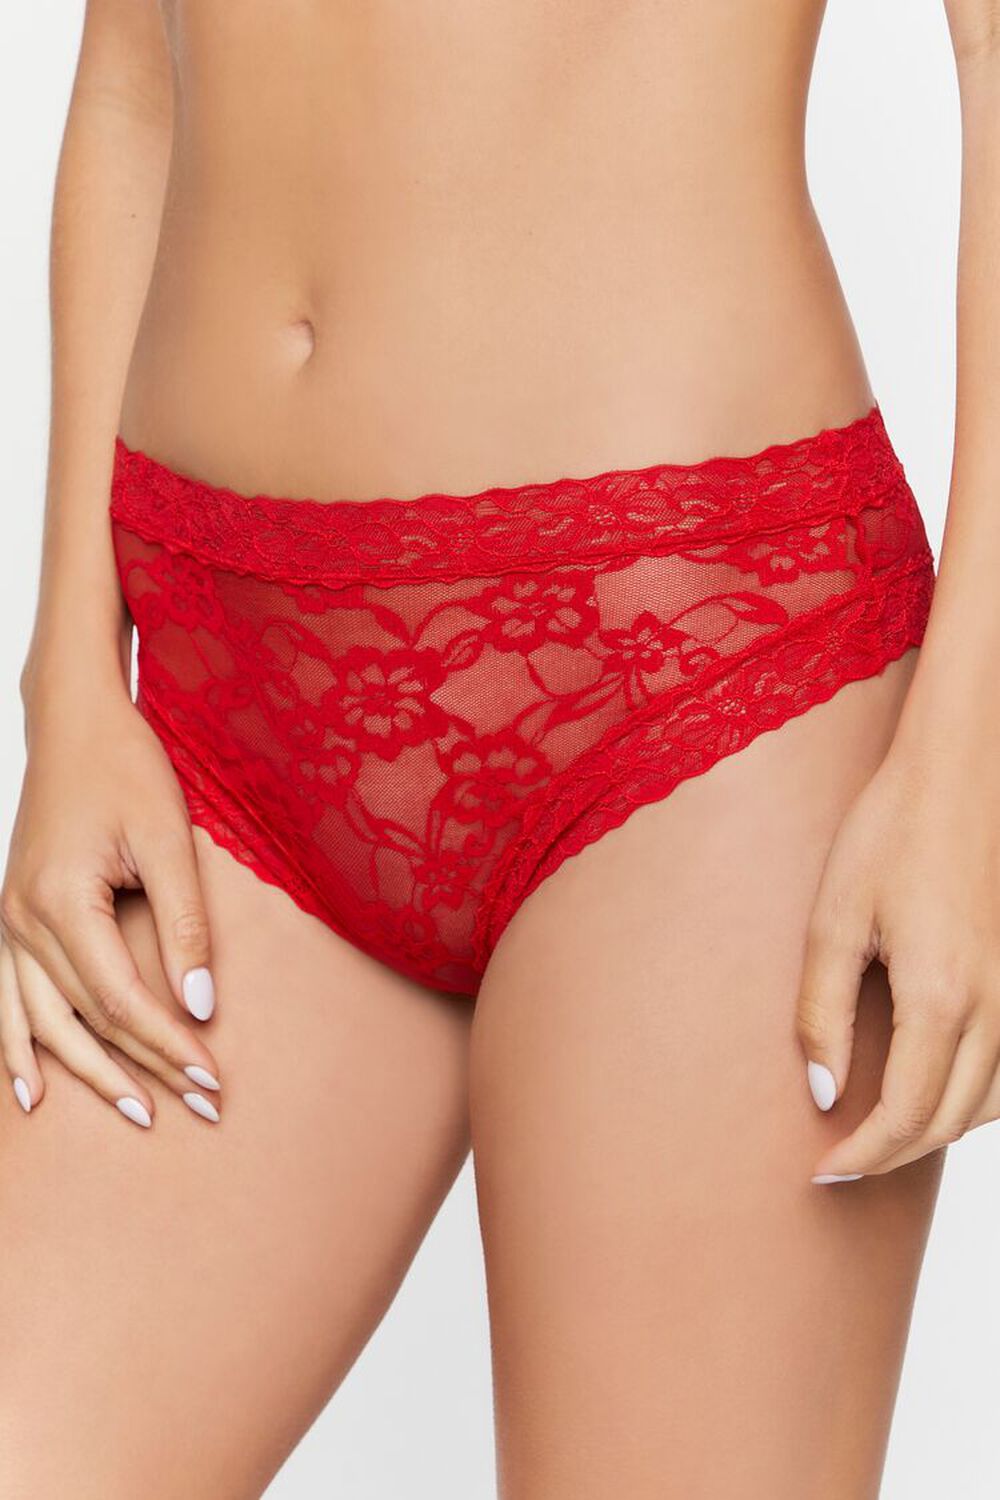 TOMATO Floral Lace Cheeky Panties, image 3